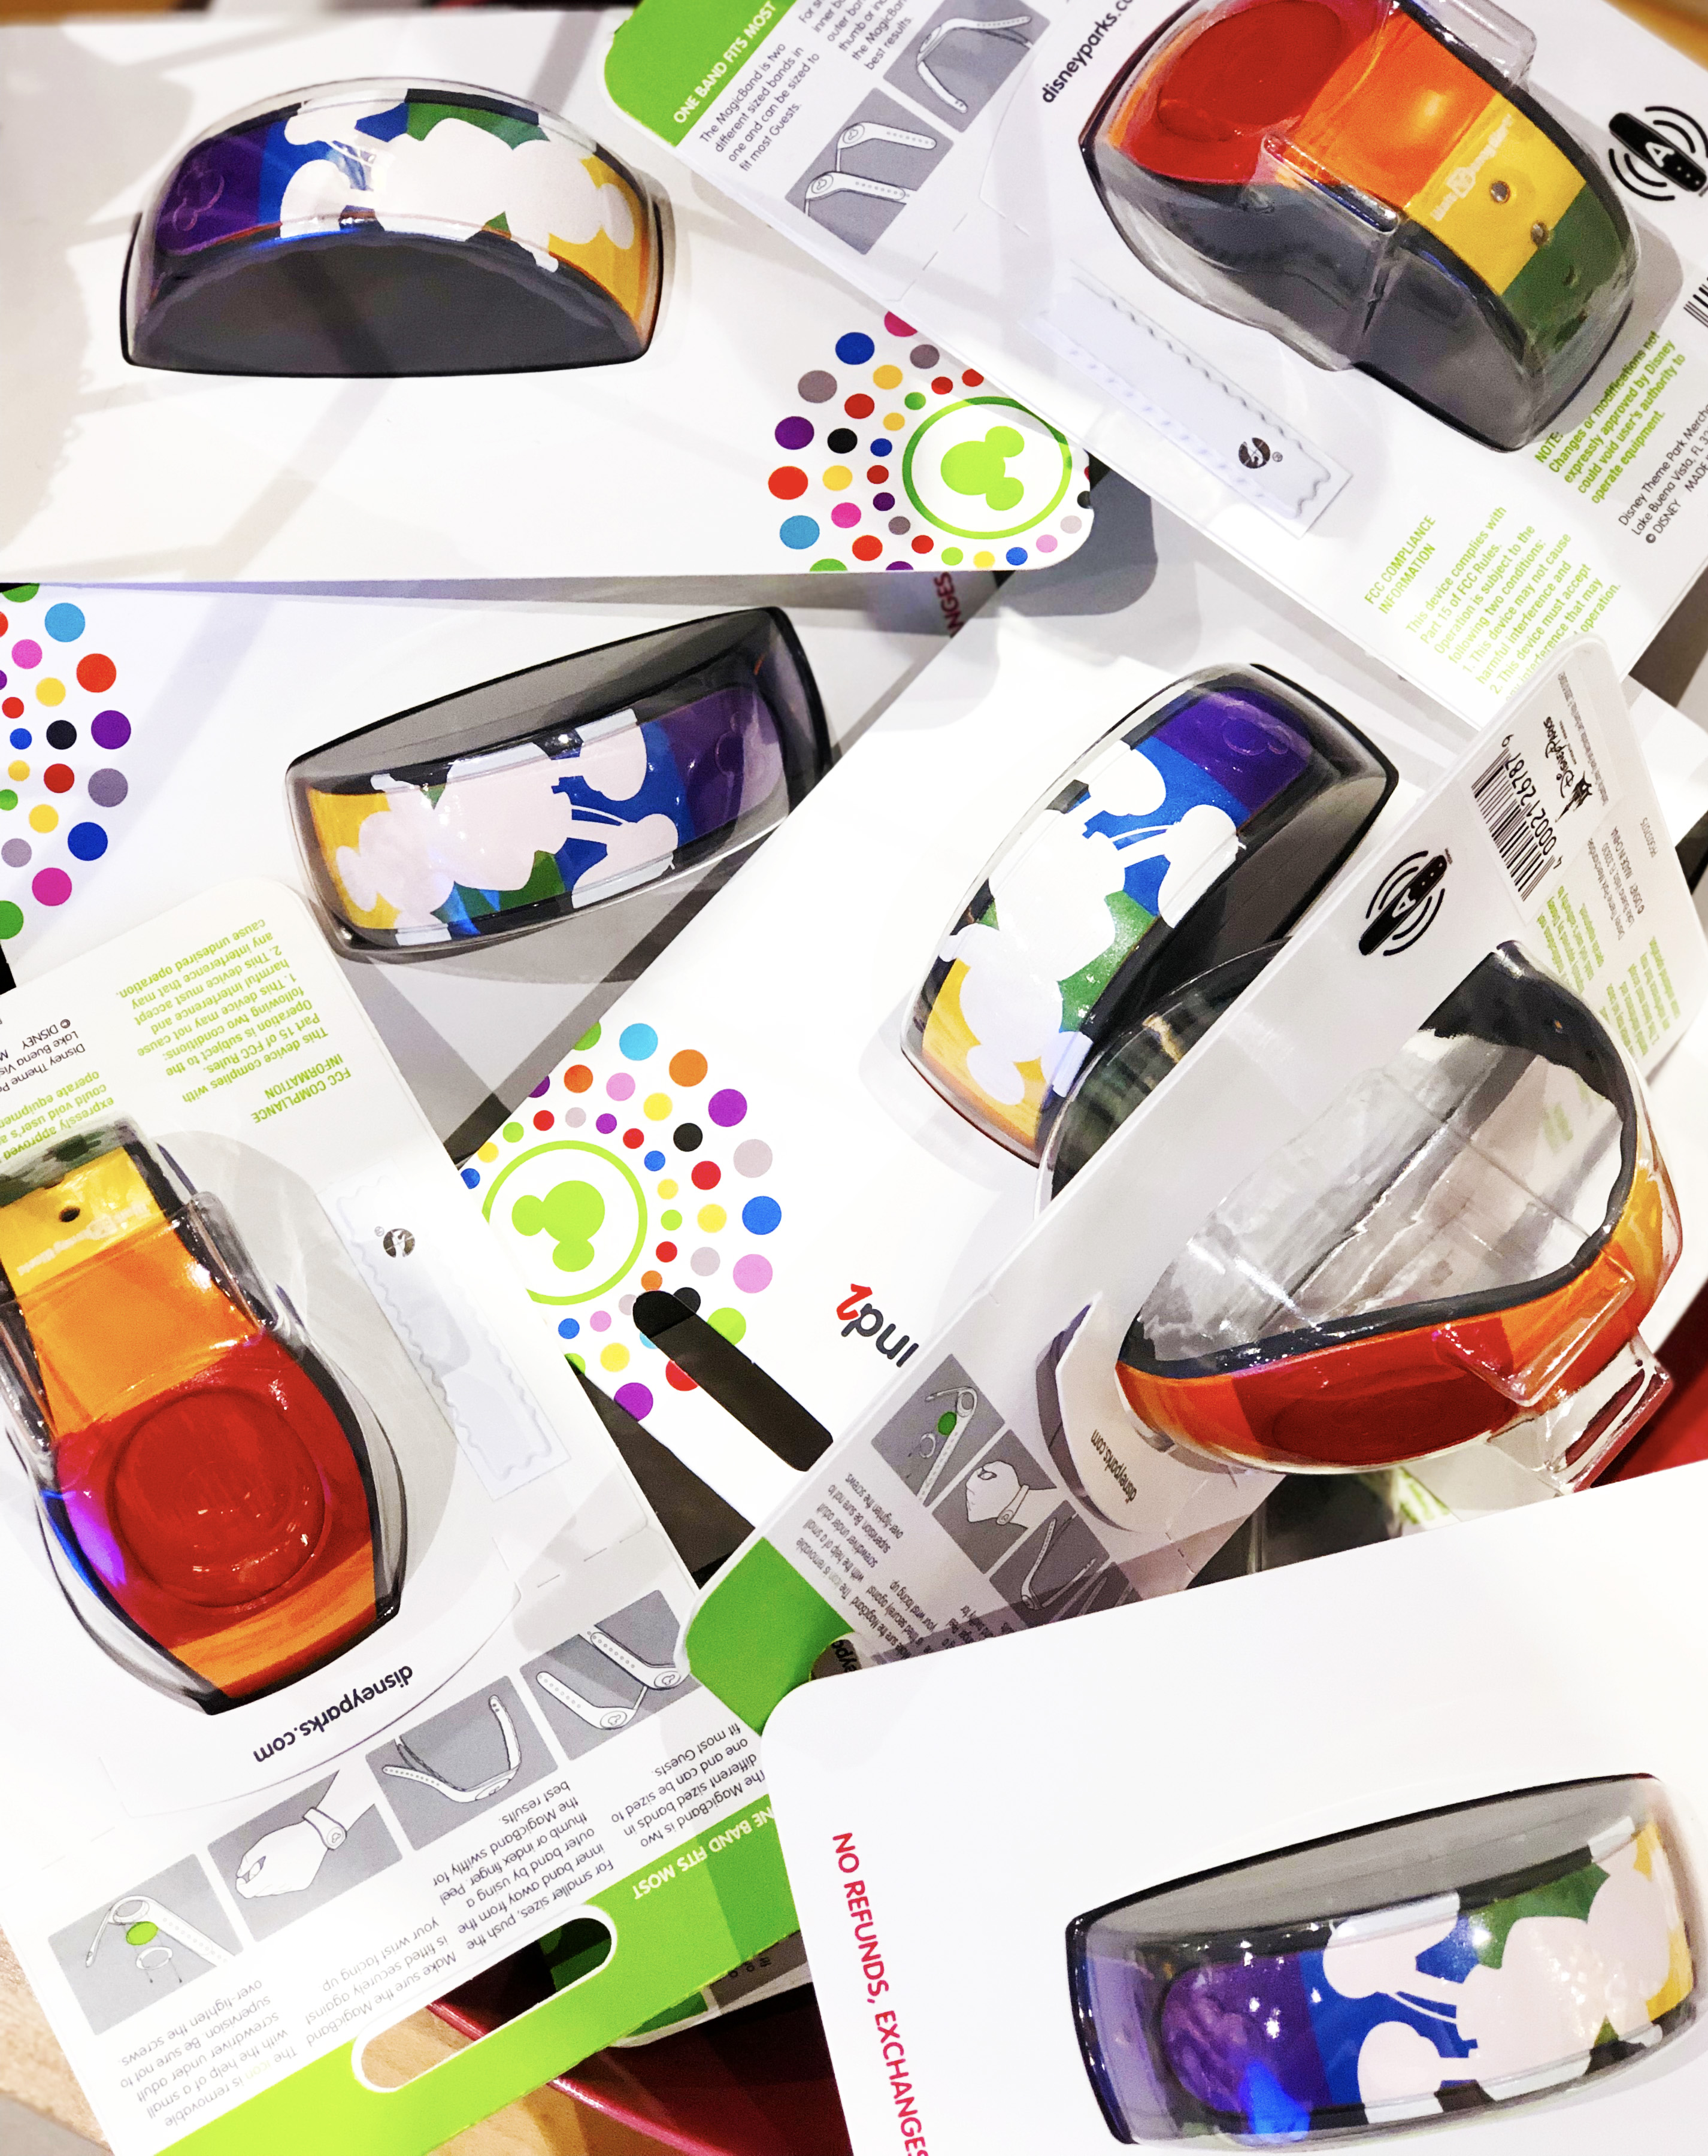 A pile of packaged MagicBands designed with a white silhouette of Mickey Mouse and a striped-rainbow band.